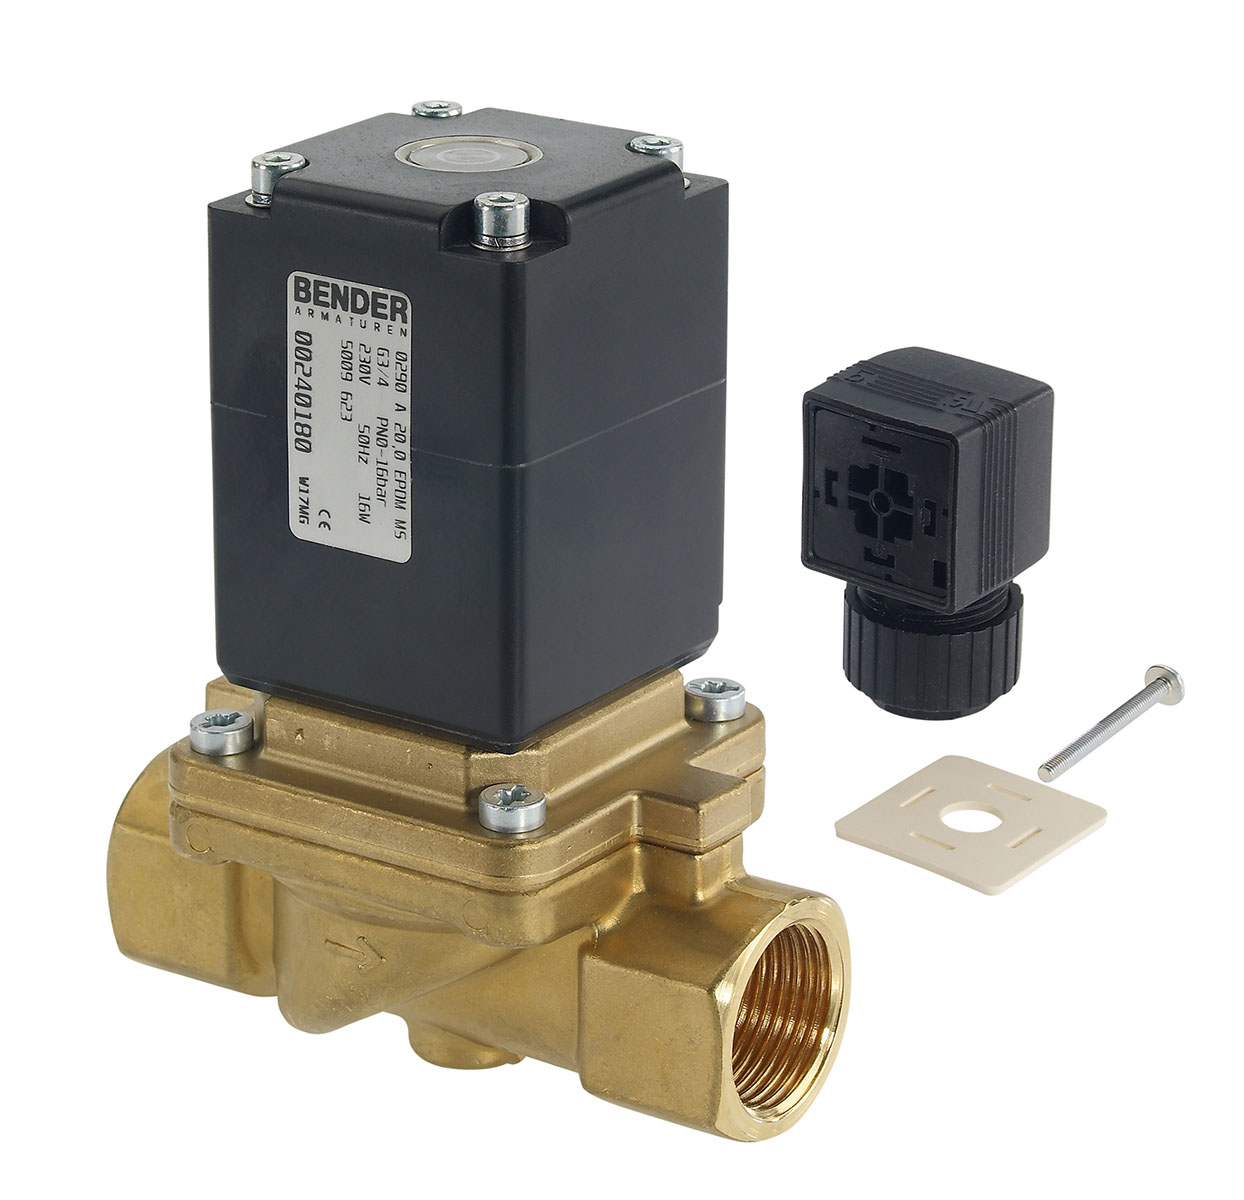 5009624 - 2/2 way solenoid valve normally closed for not flammable gas and fluids Type 6; female thread